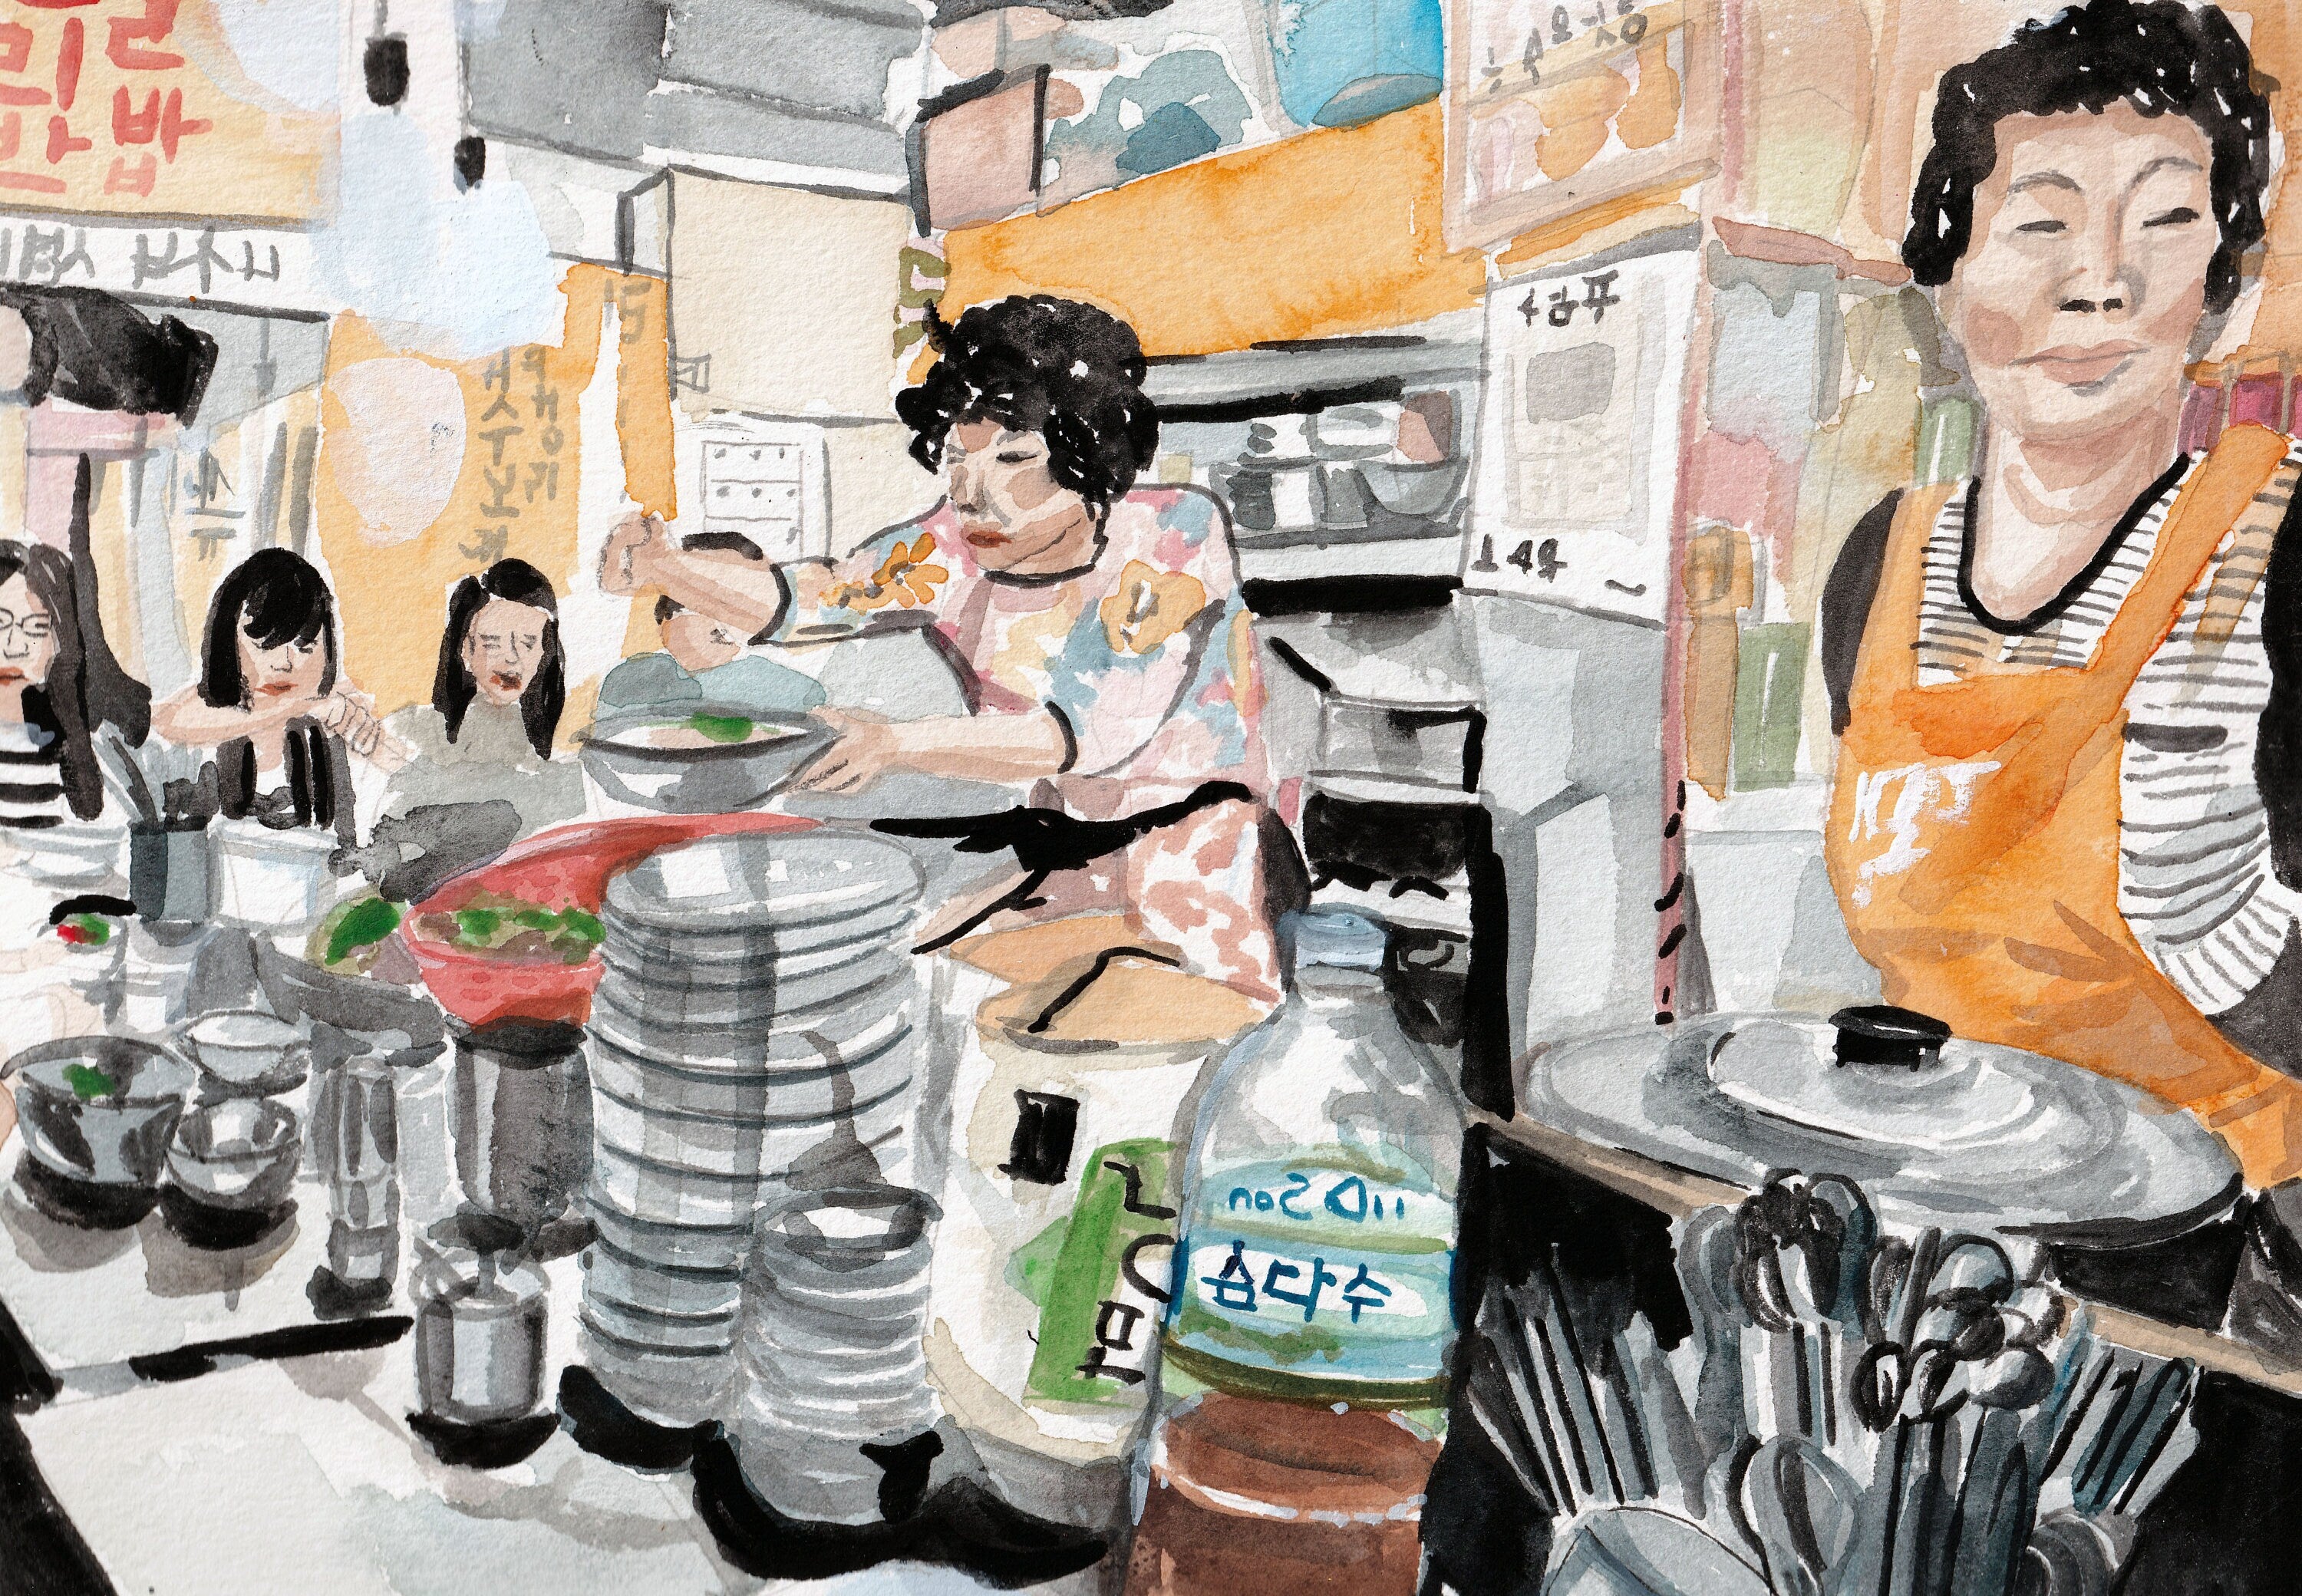 Korean street food - orange apron print of painting by Medjool Studio.  Print of original gouache painting featuring a scene of people gathered around a table and being served by someone in an orange apron.